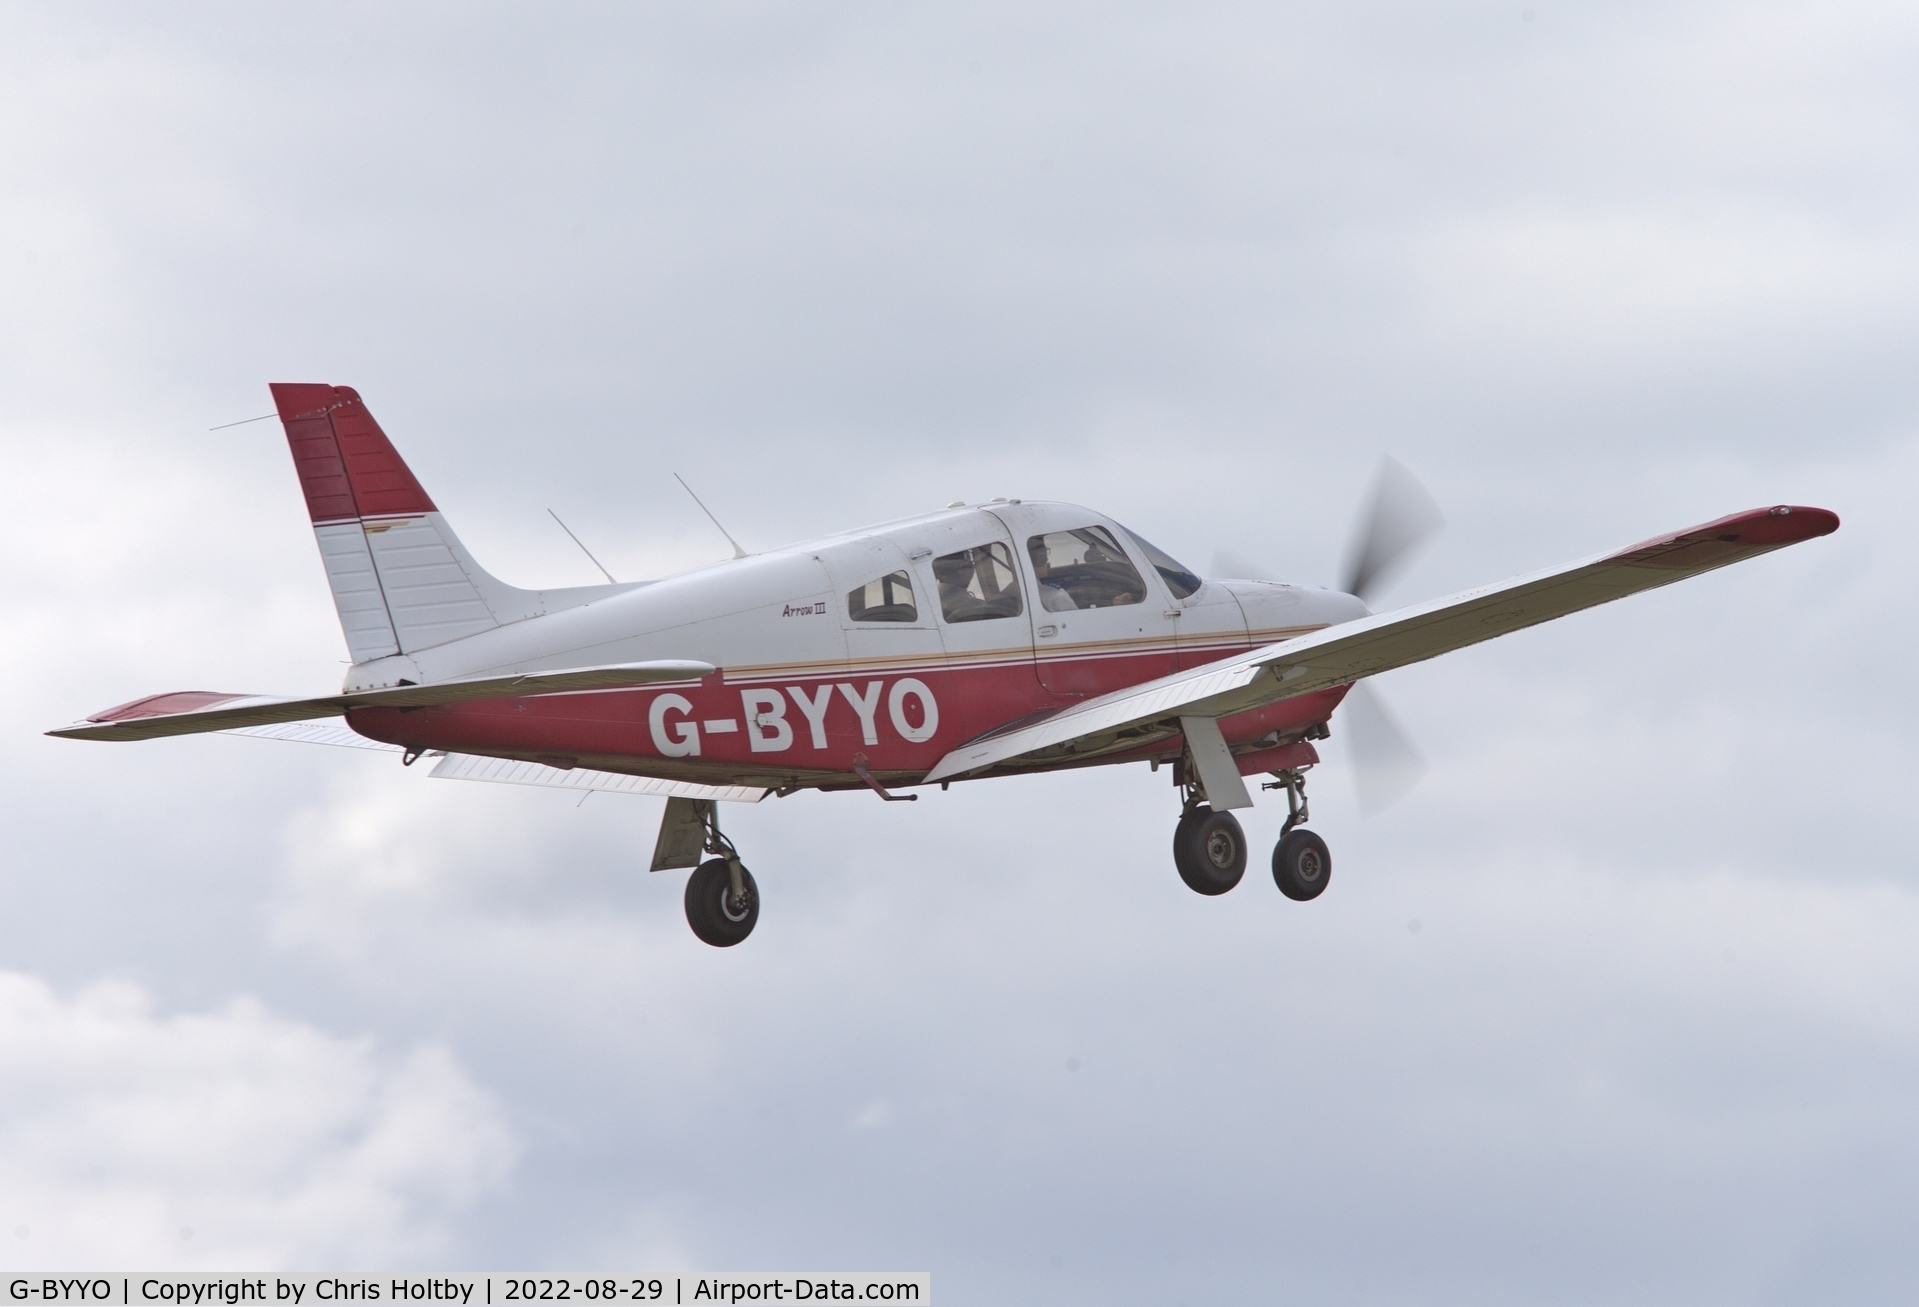 G-BYYO, 1994 Piper PA-28R-201 Cherokee Arrow III C/N 28R-2837061, Taking off from its base at Stapleford Tawney, Essex